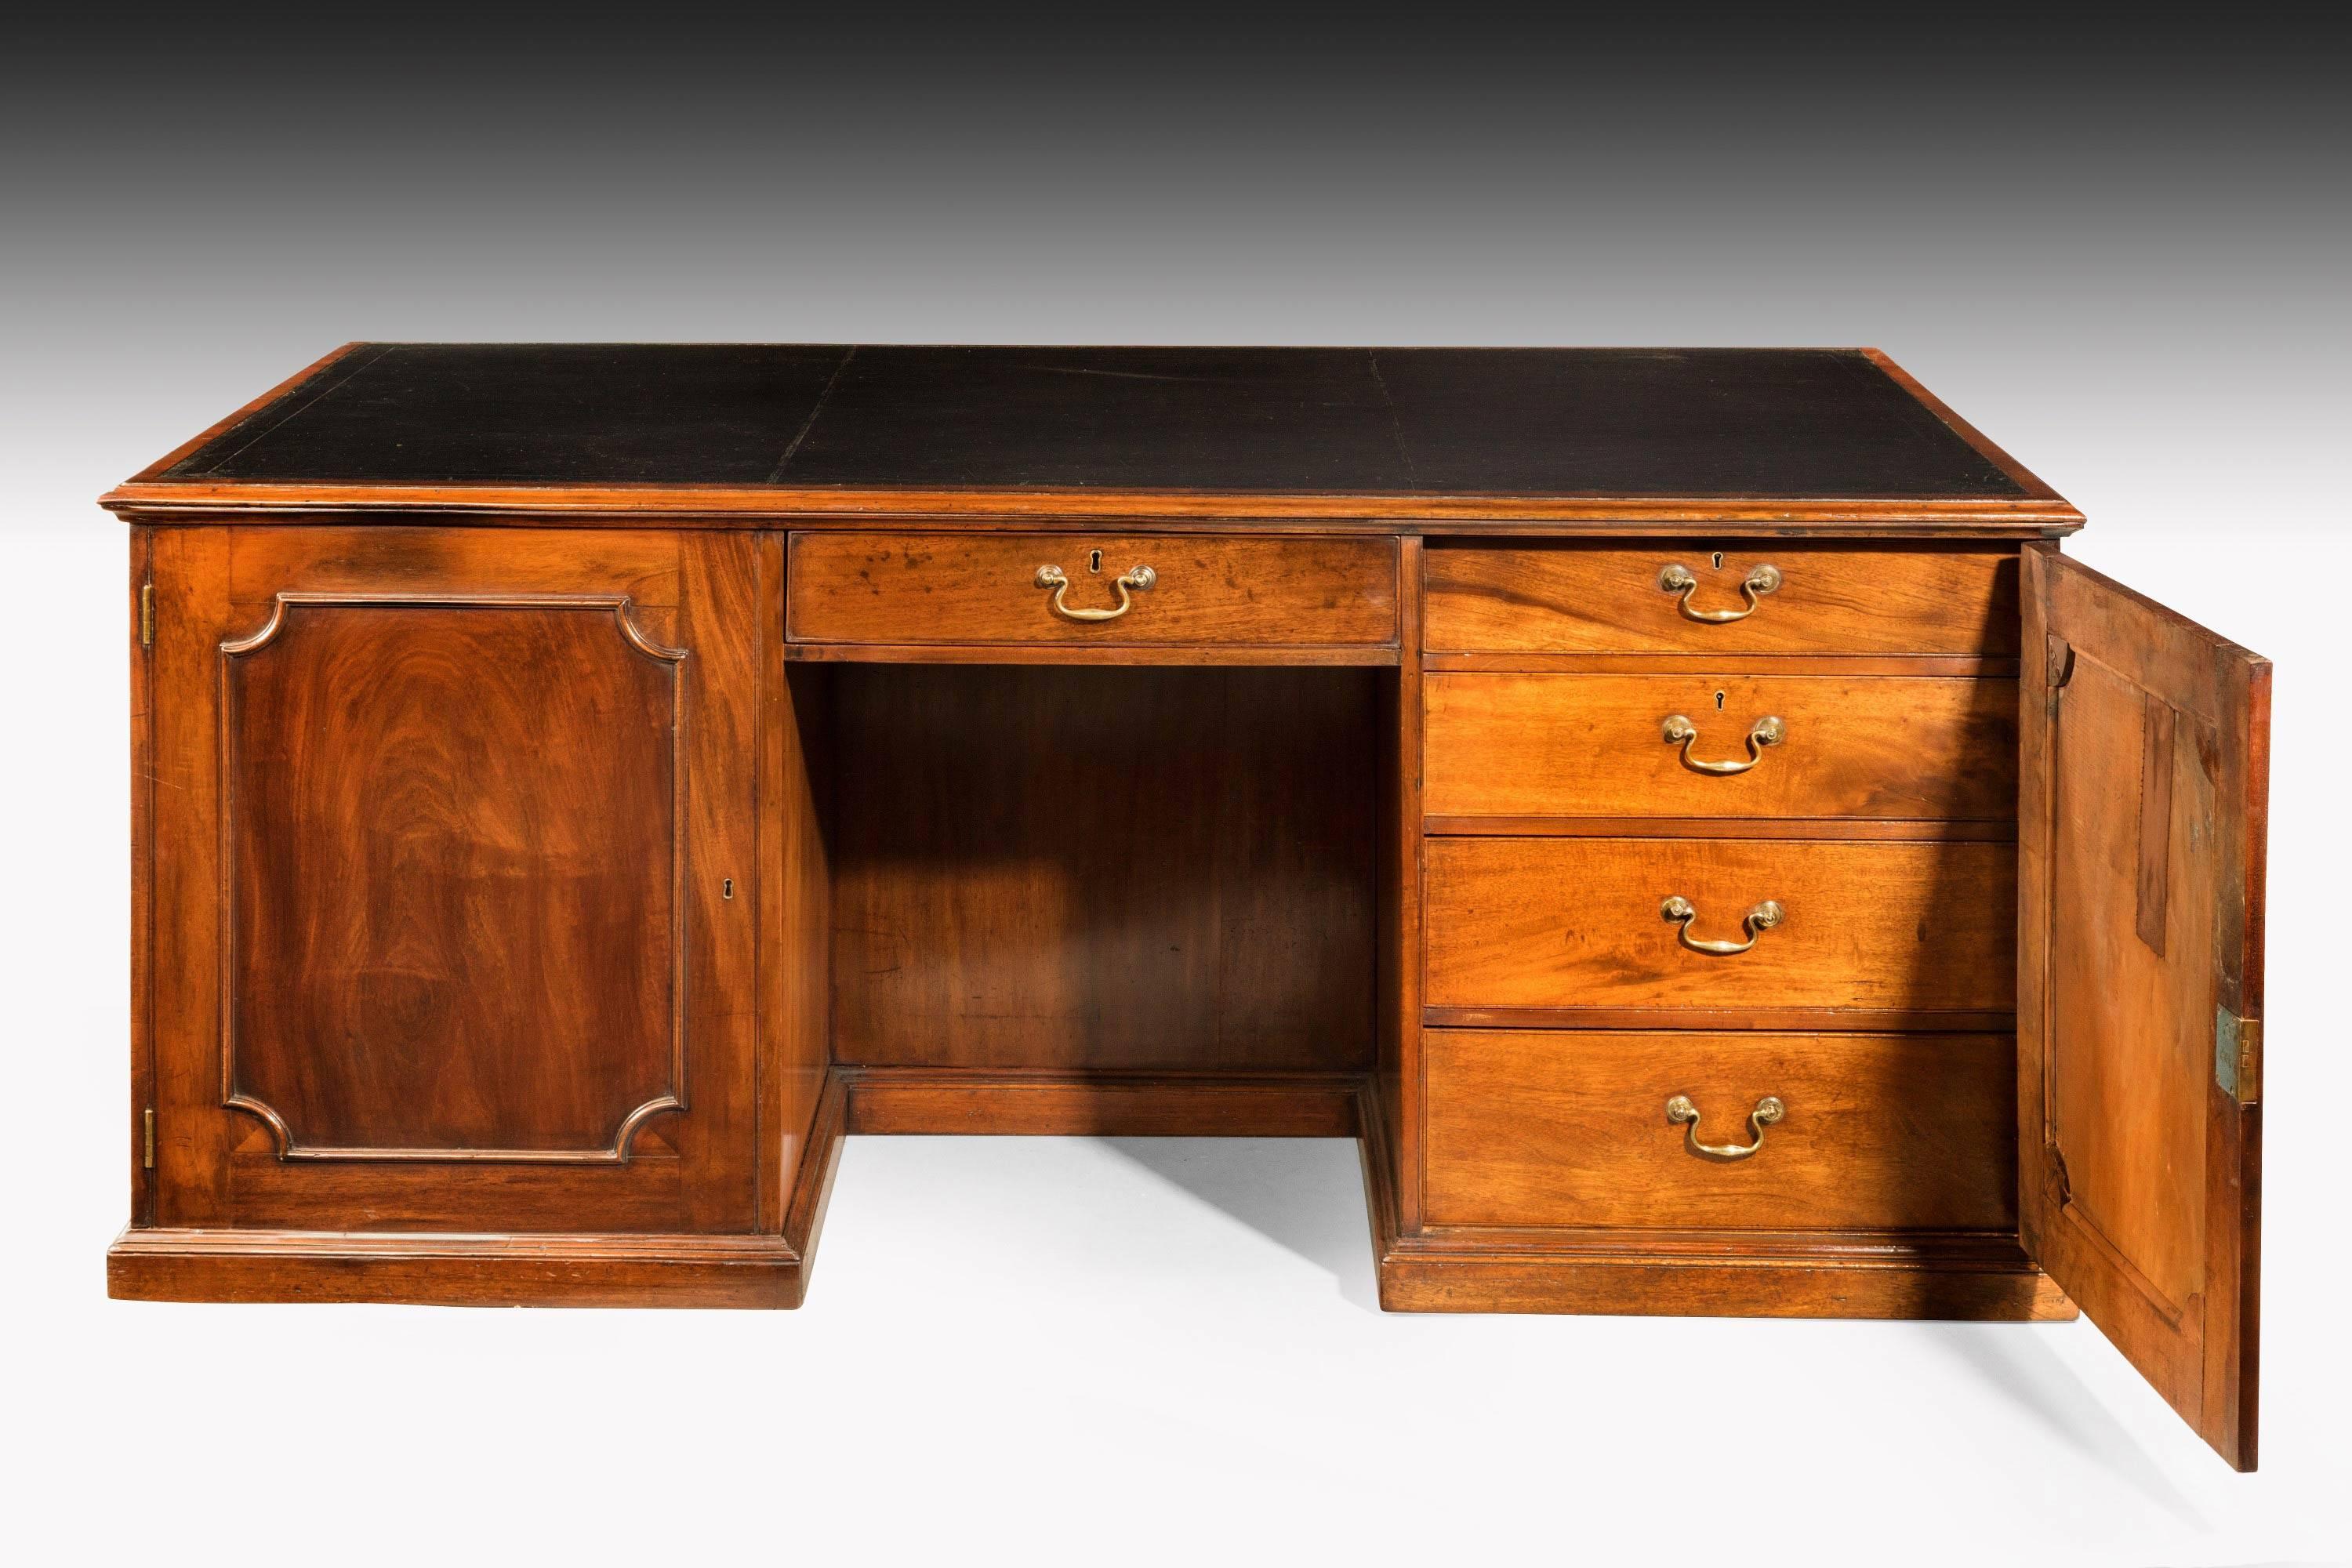 A very good Chippendale period mahogany desk of unusual form. The ends with blind drawers. The fitted sections behind the pillars which are original. Good swan neck handles.